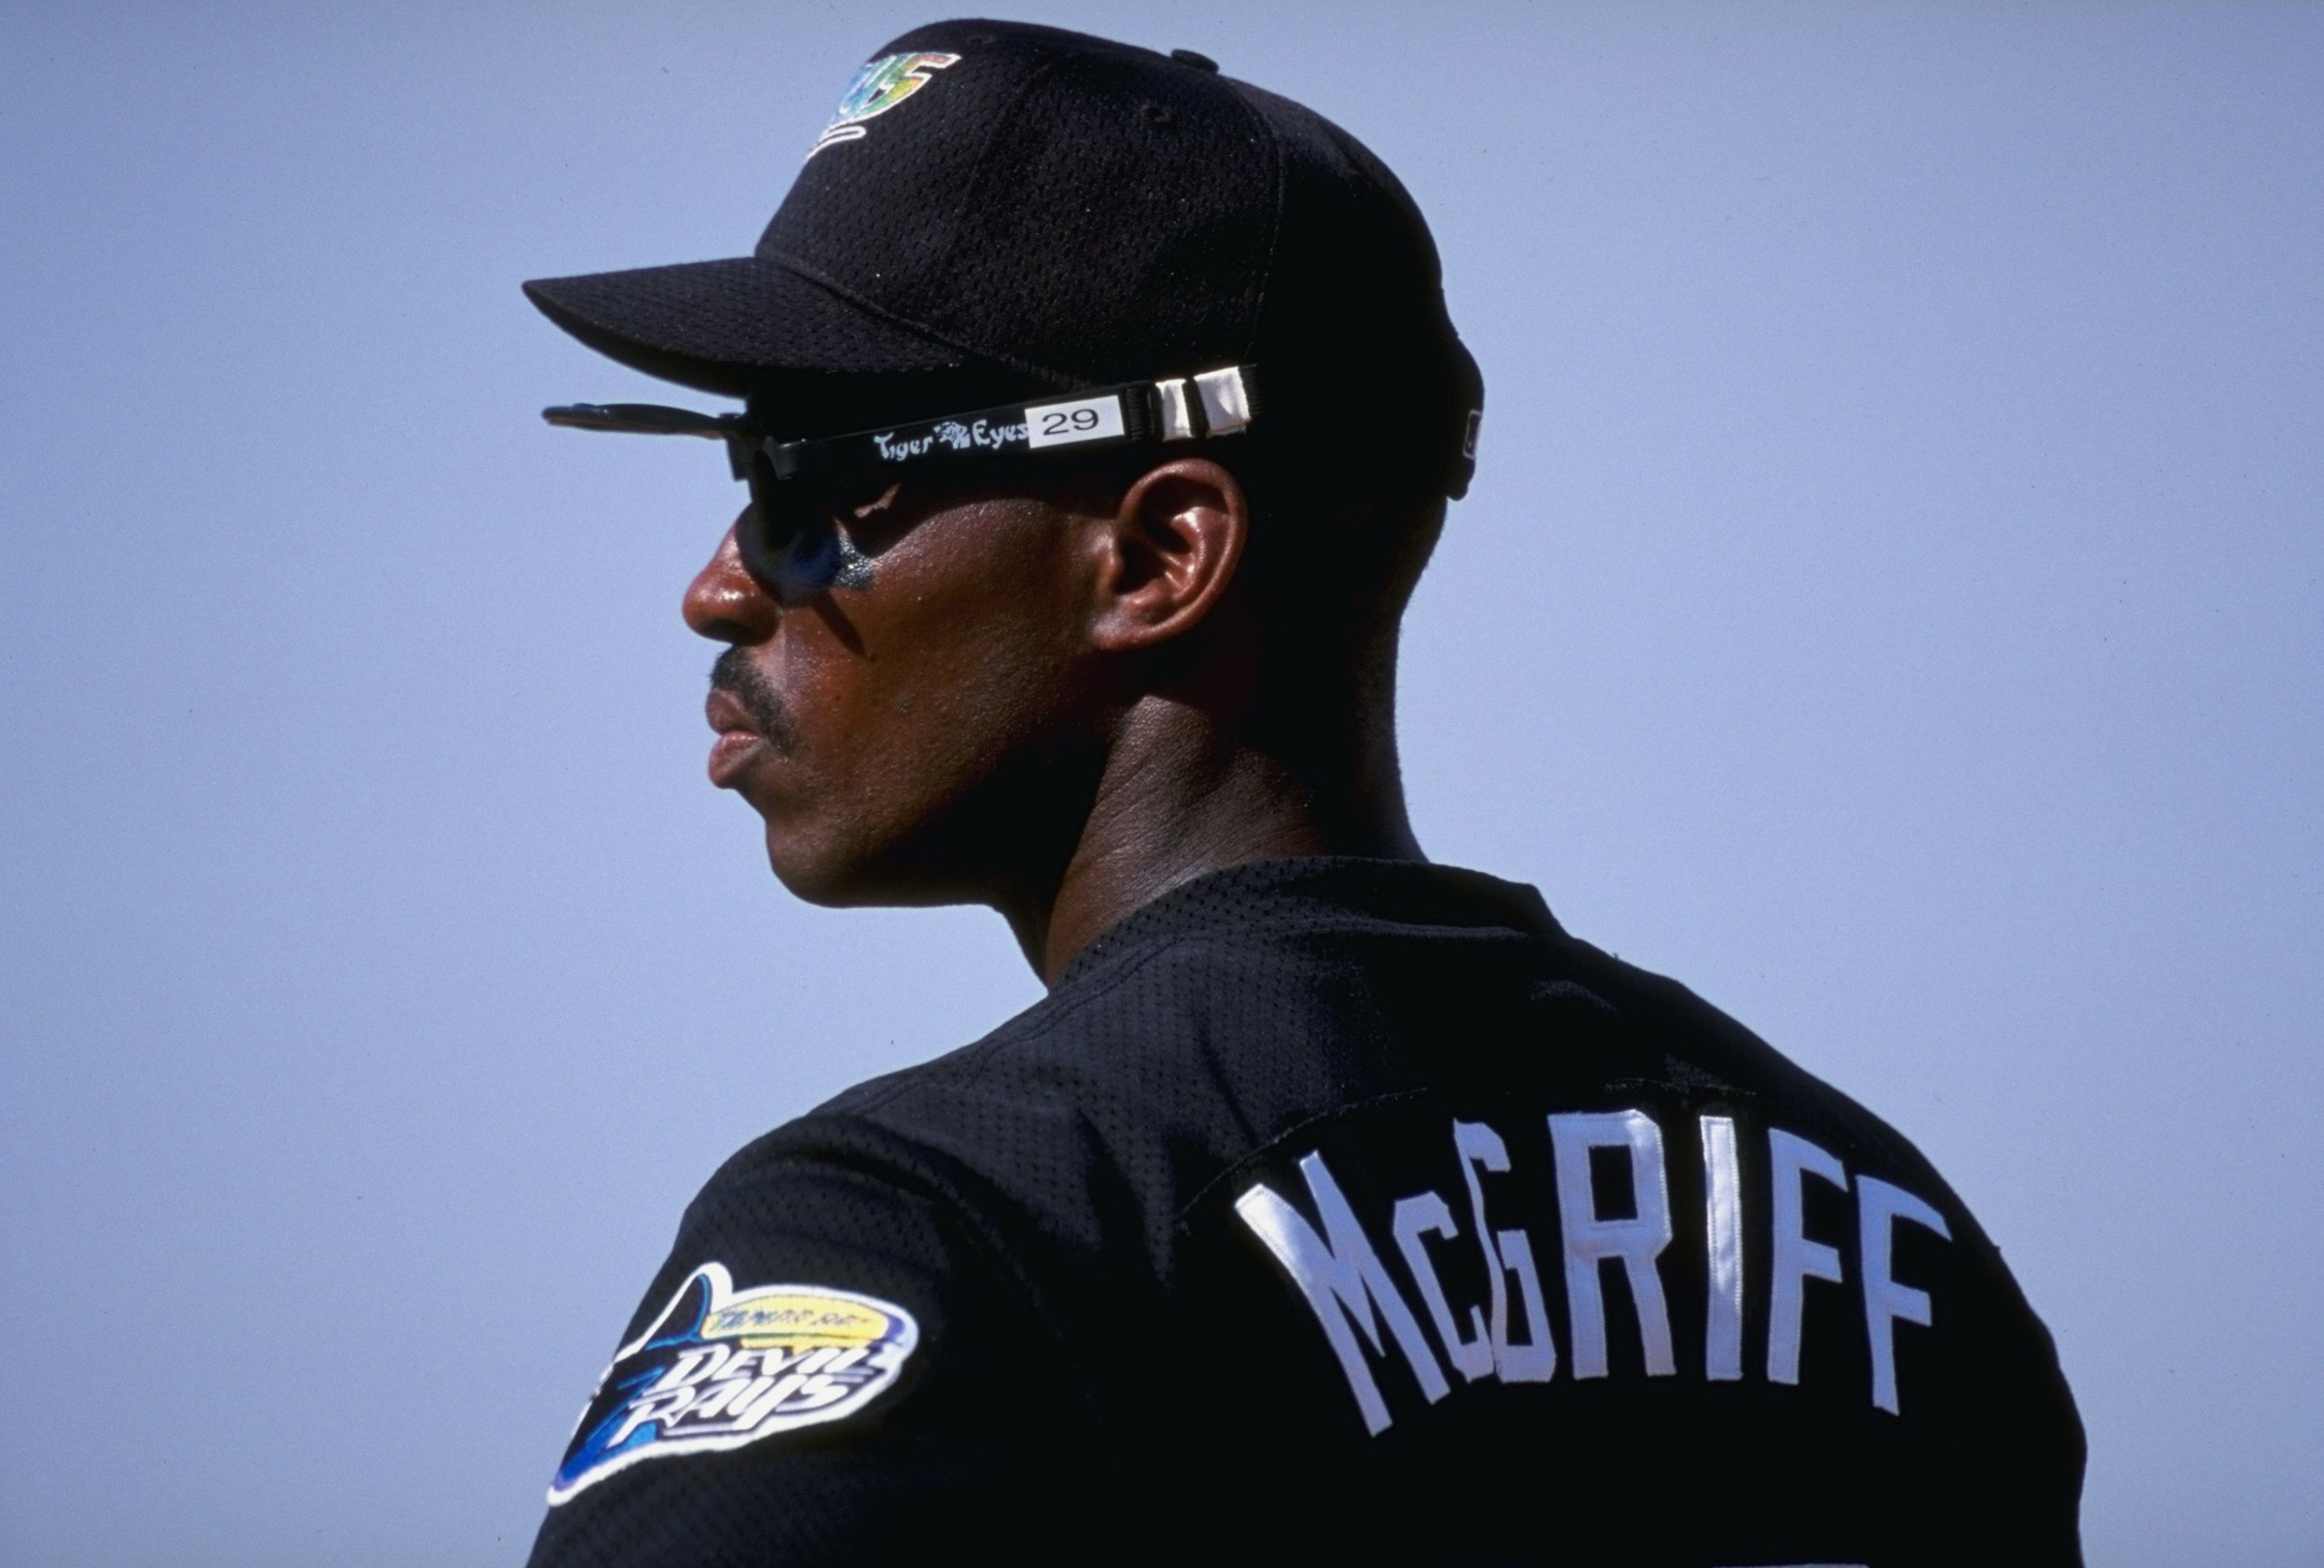 Will Fred McGriff or Dale Murphy make it into the Hall of Fame